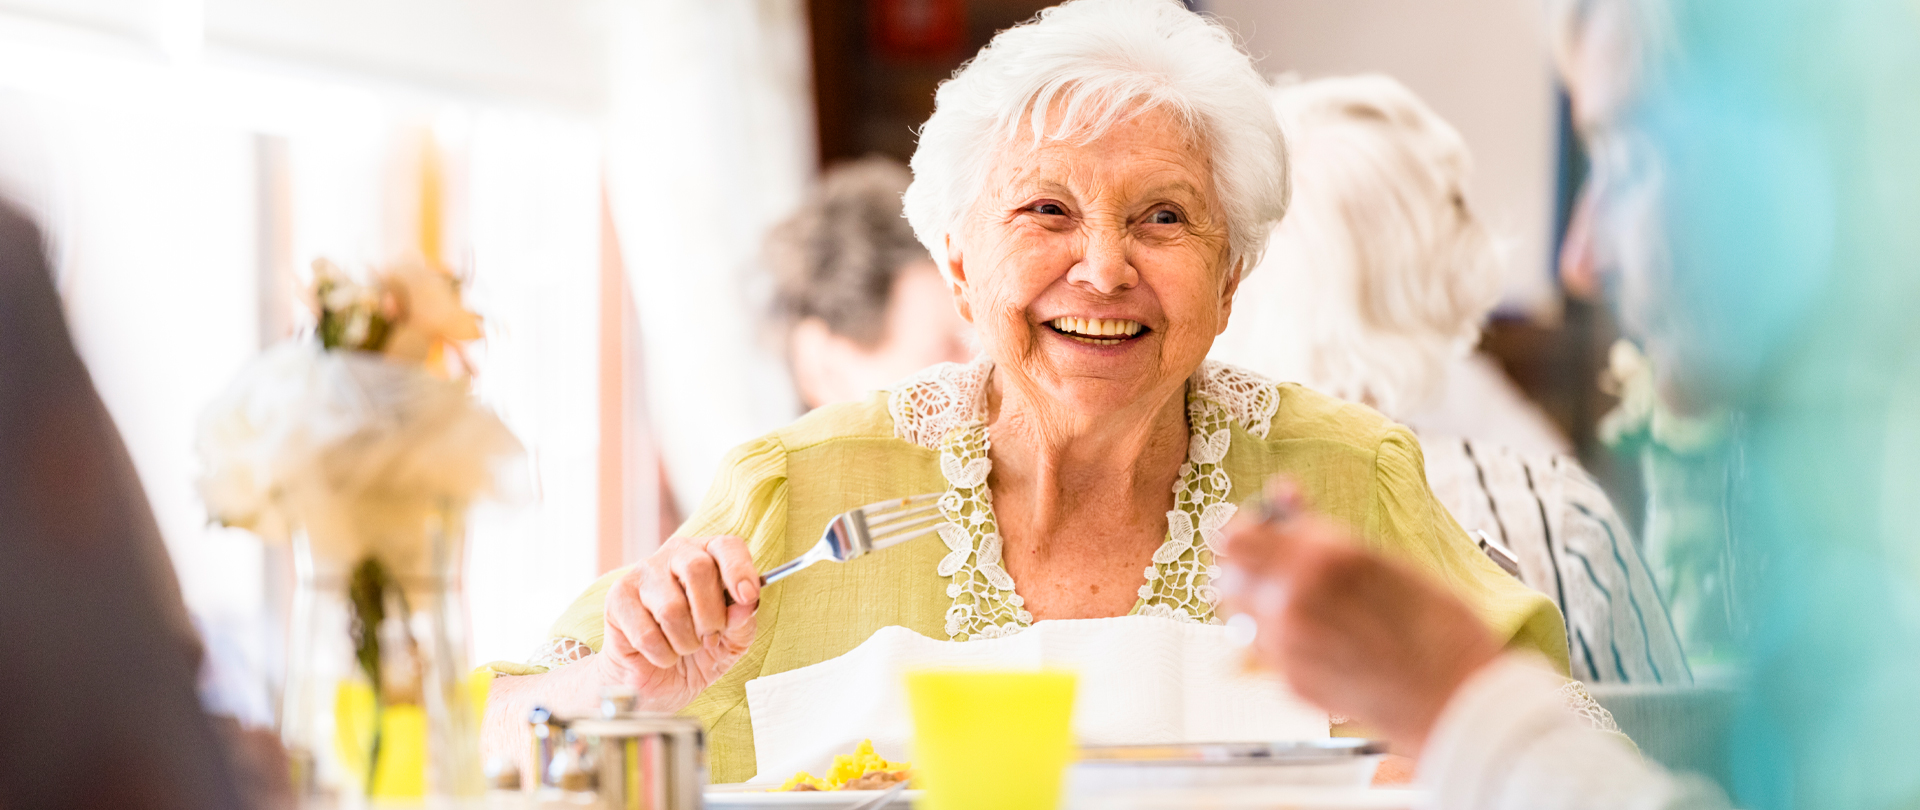 Senior Adult Luncheon
Thursday, May 23
Register now!
 
